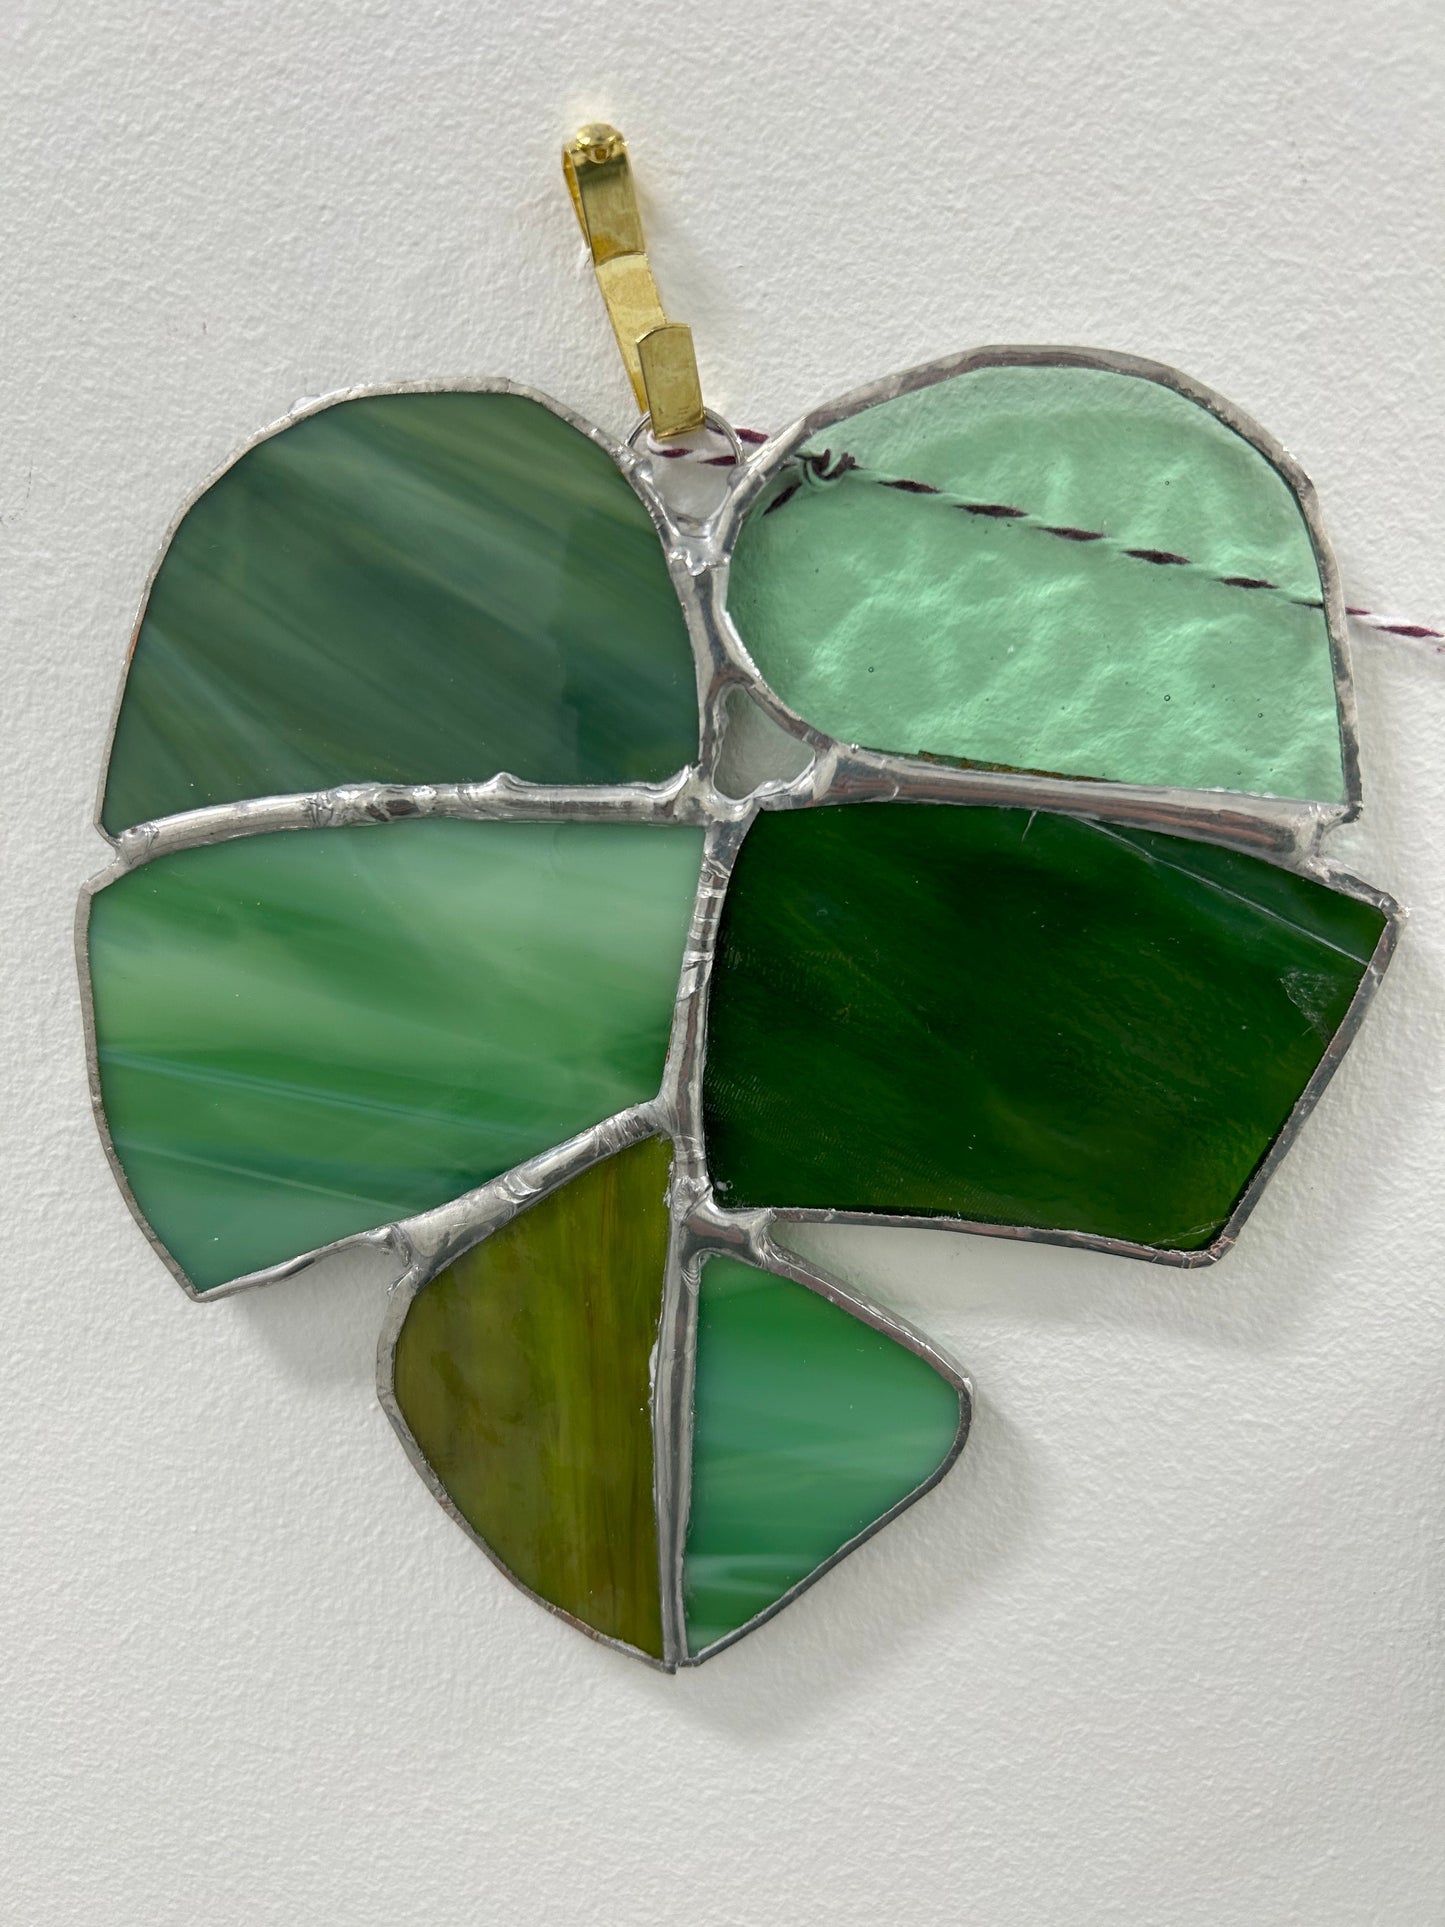 Beginner Stained Glass class, May 30,4 -6:00 pm